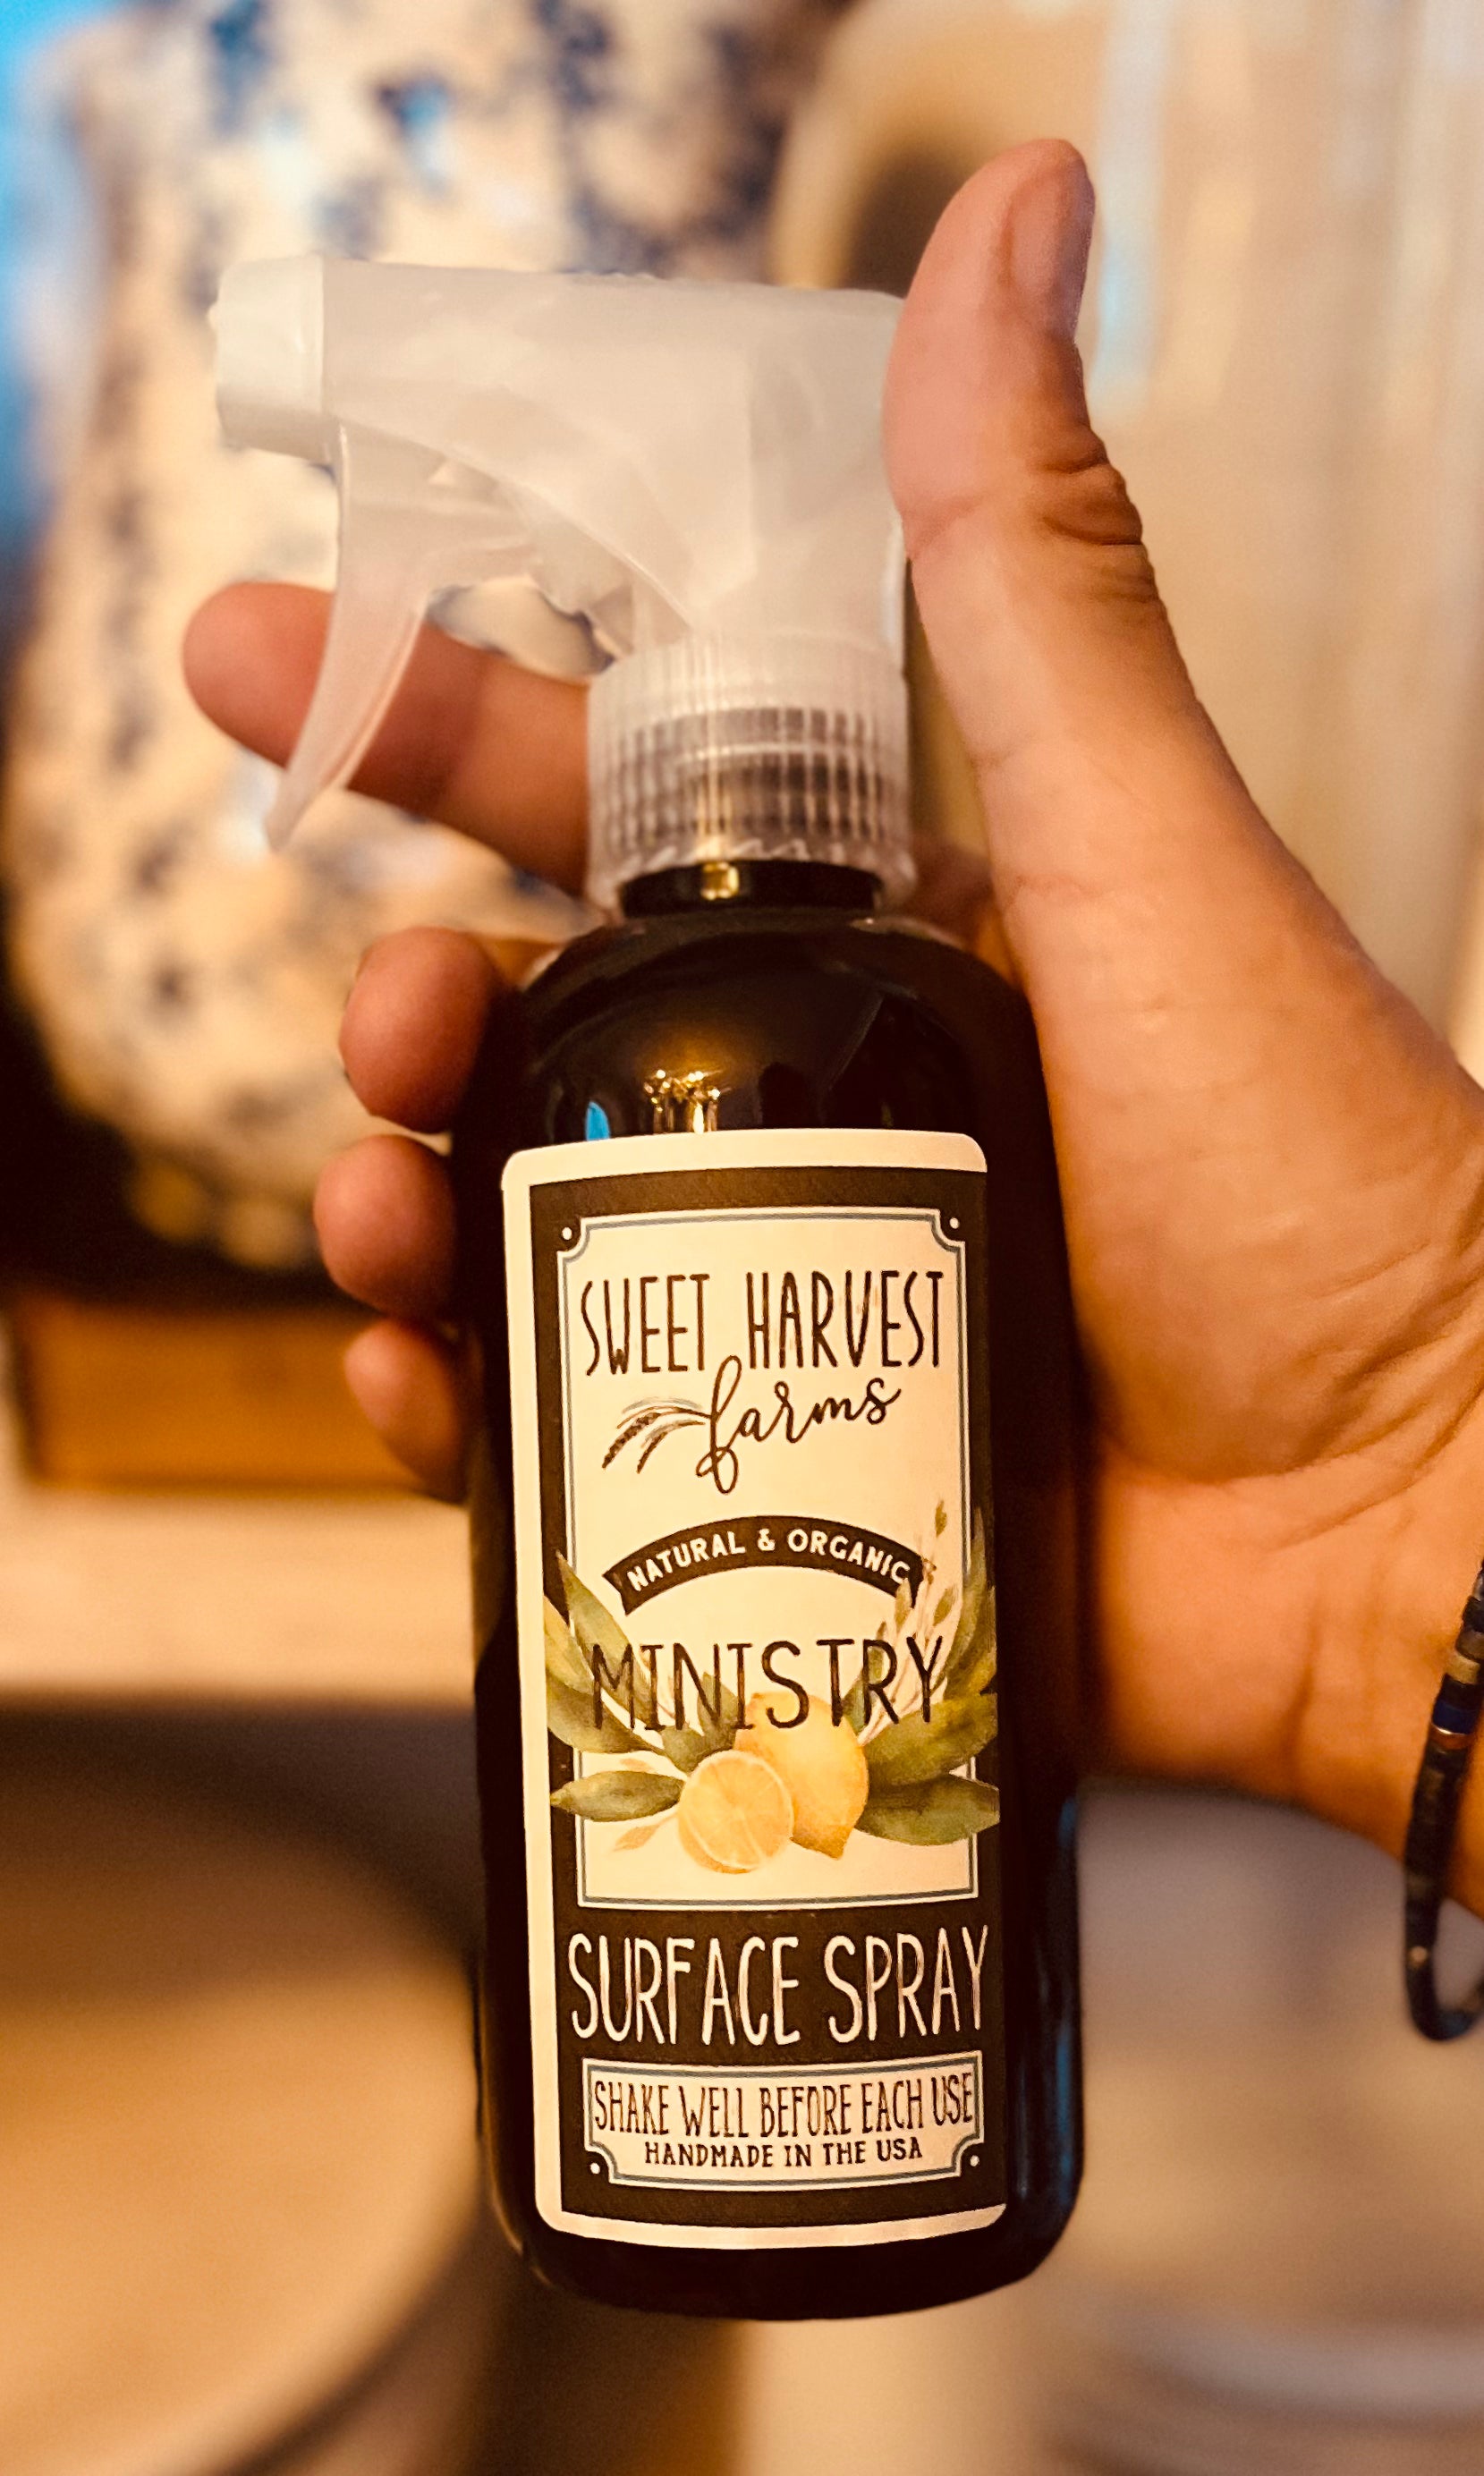 Our Ministry Oil is our reformulation of Thieves Oil. Sweet Harvest Farms Thieves oil is uncut and has an amazing aroma! Better than Thieves oil our formulation using organic oil can stop the norovirus in its tracts! Sweet Harvest Farms organic handmade Surface Spray is great for cleaning and disinfecting counters, door knobs and other touch points